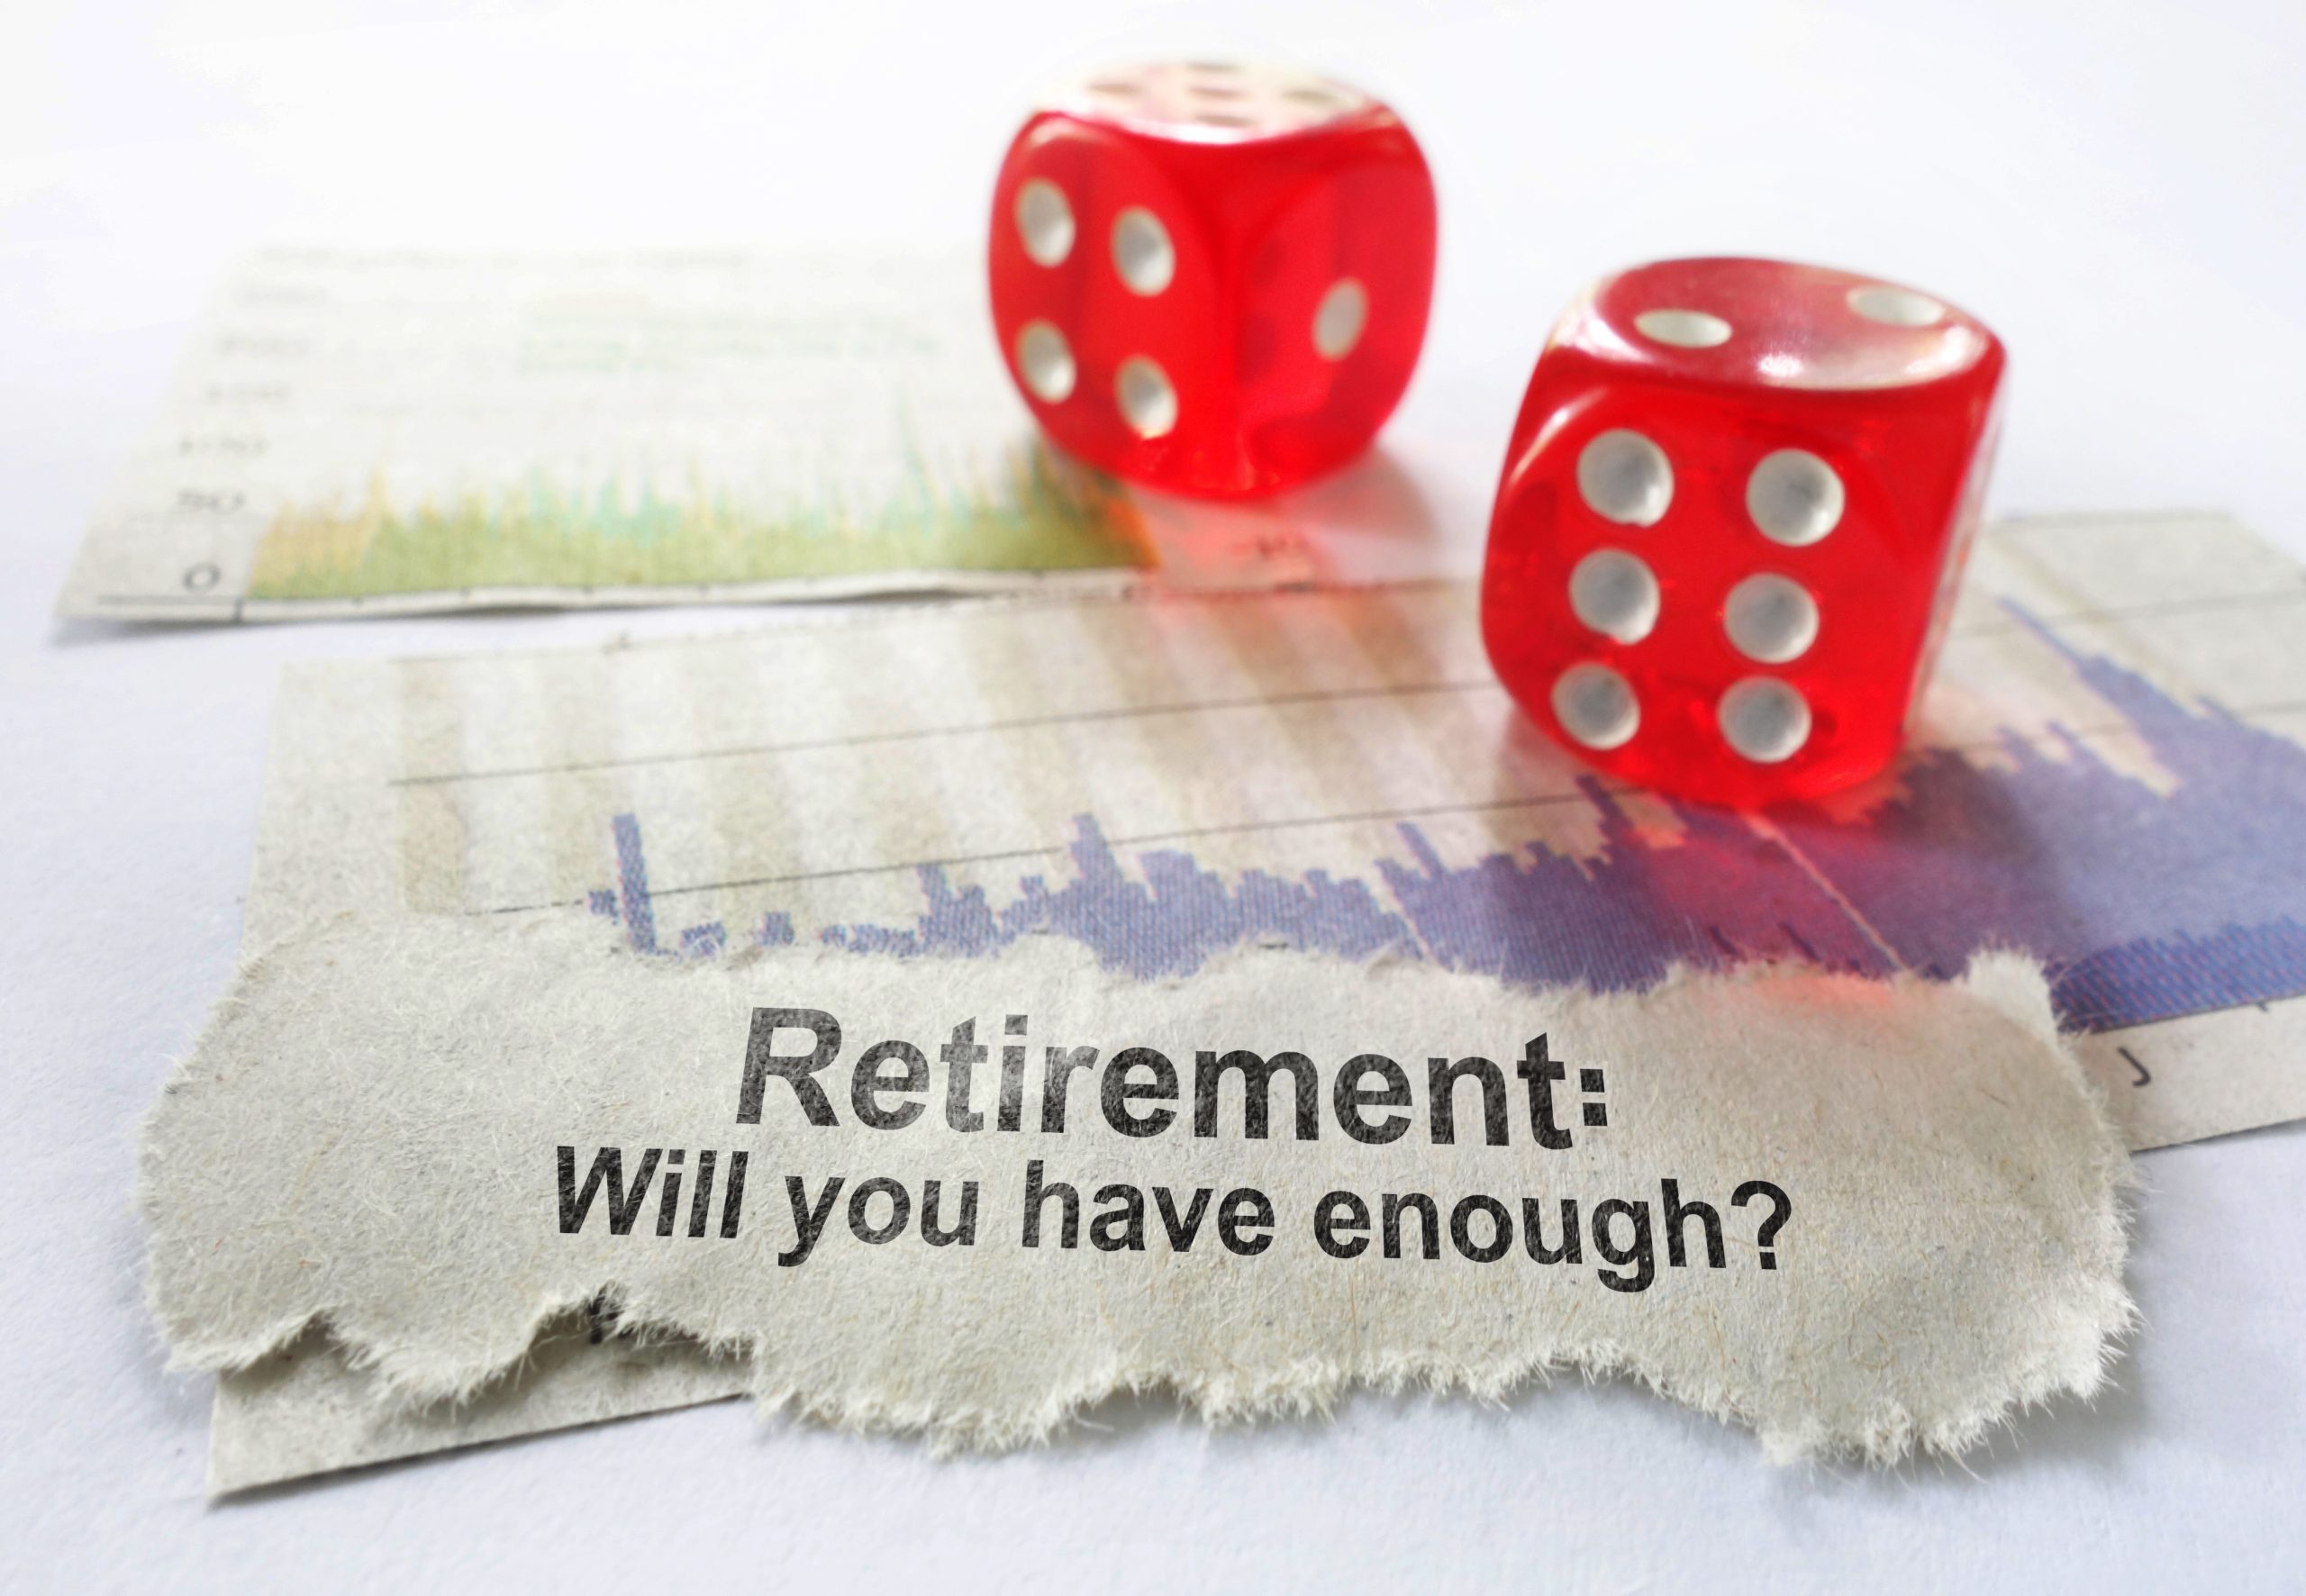 Are You Confident About a Financially Secure Retirement?